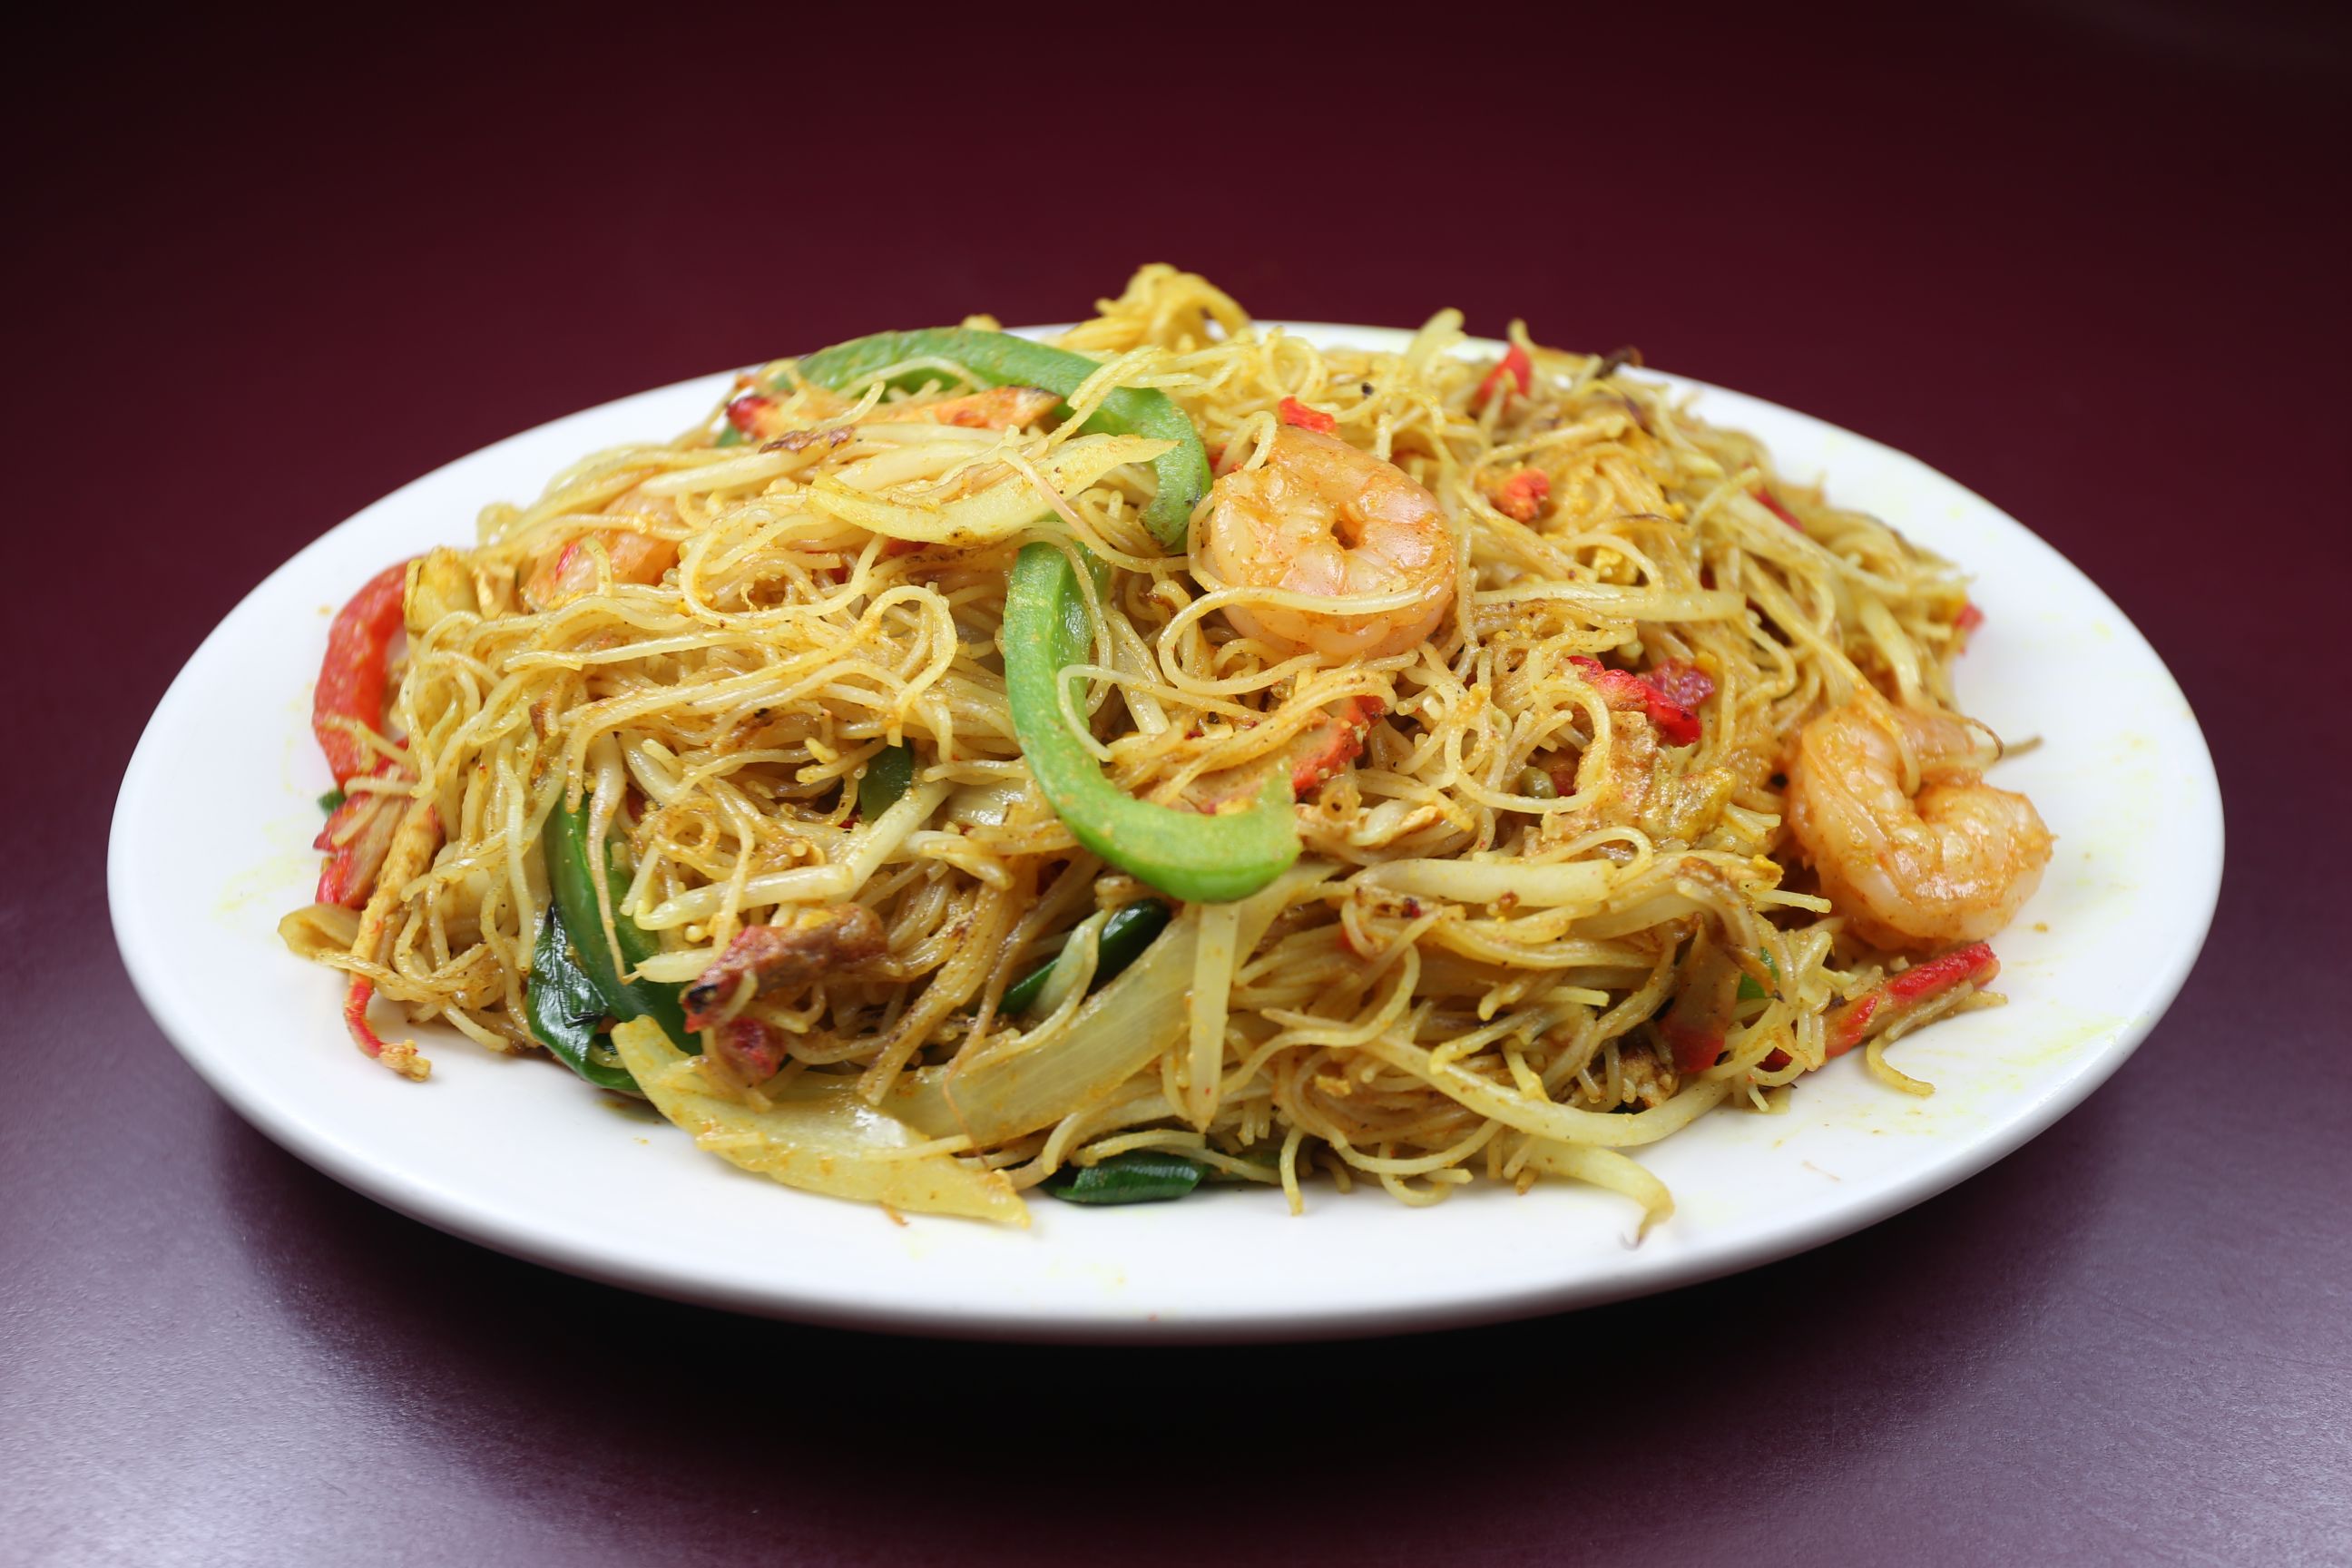 vermicelli singapore style <img title='Spicy & Hot' align='absmiddle' src='/css/spicy.png' />